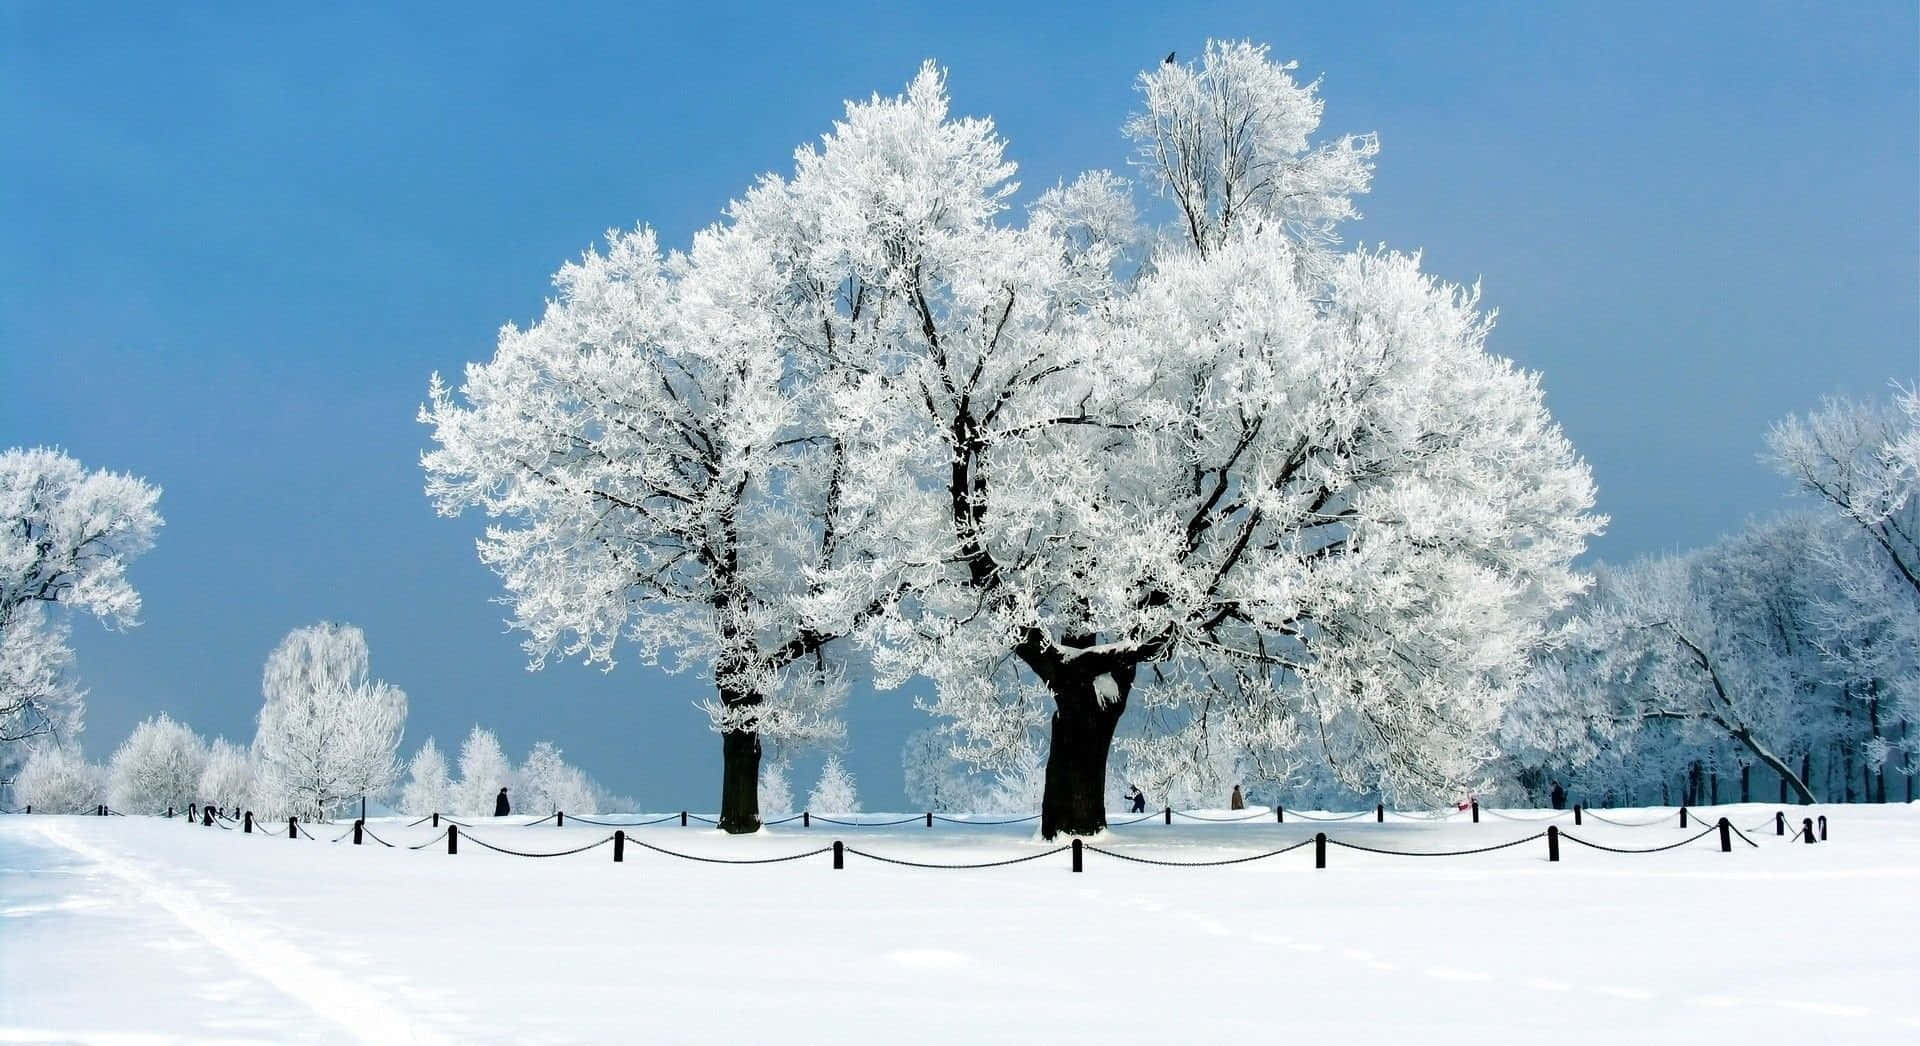 Snow-capped Trees in a Serene Winter Landscape Wallpaper